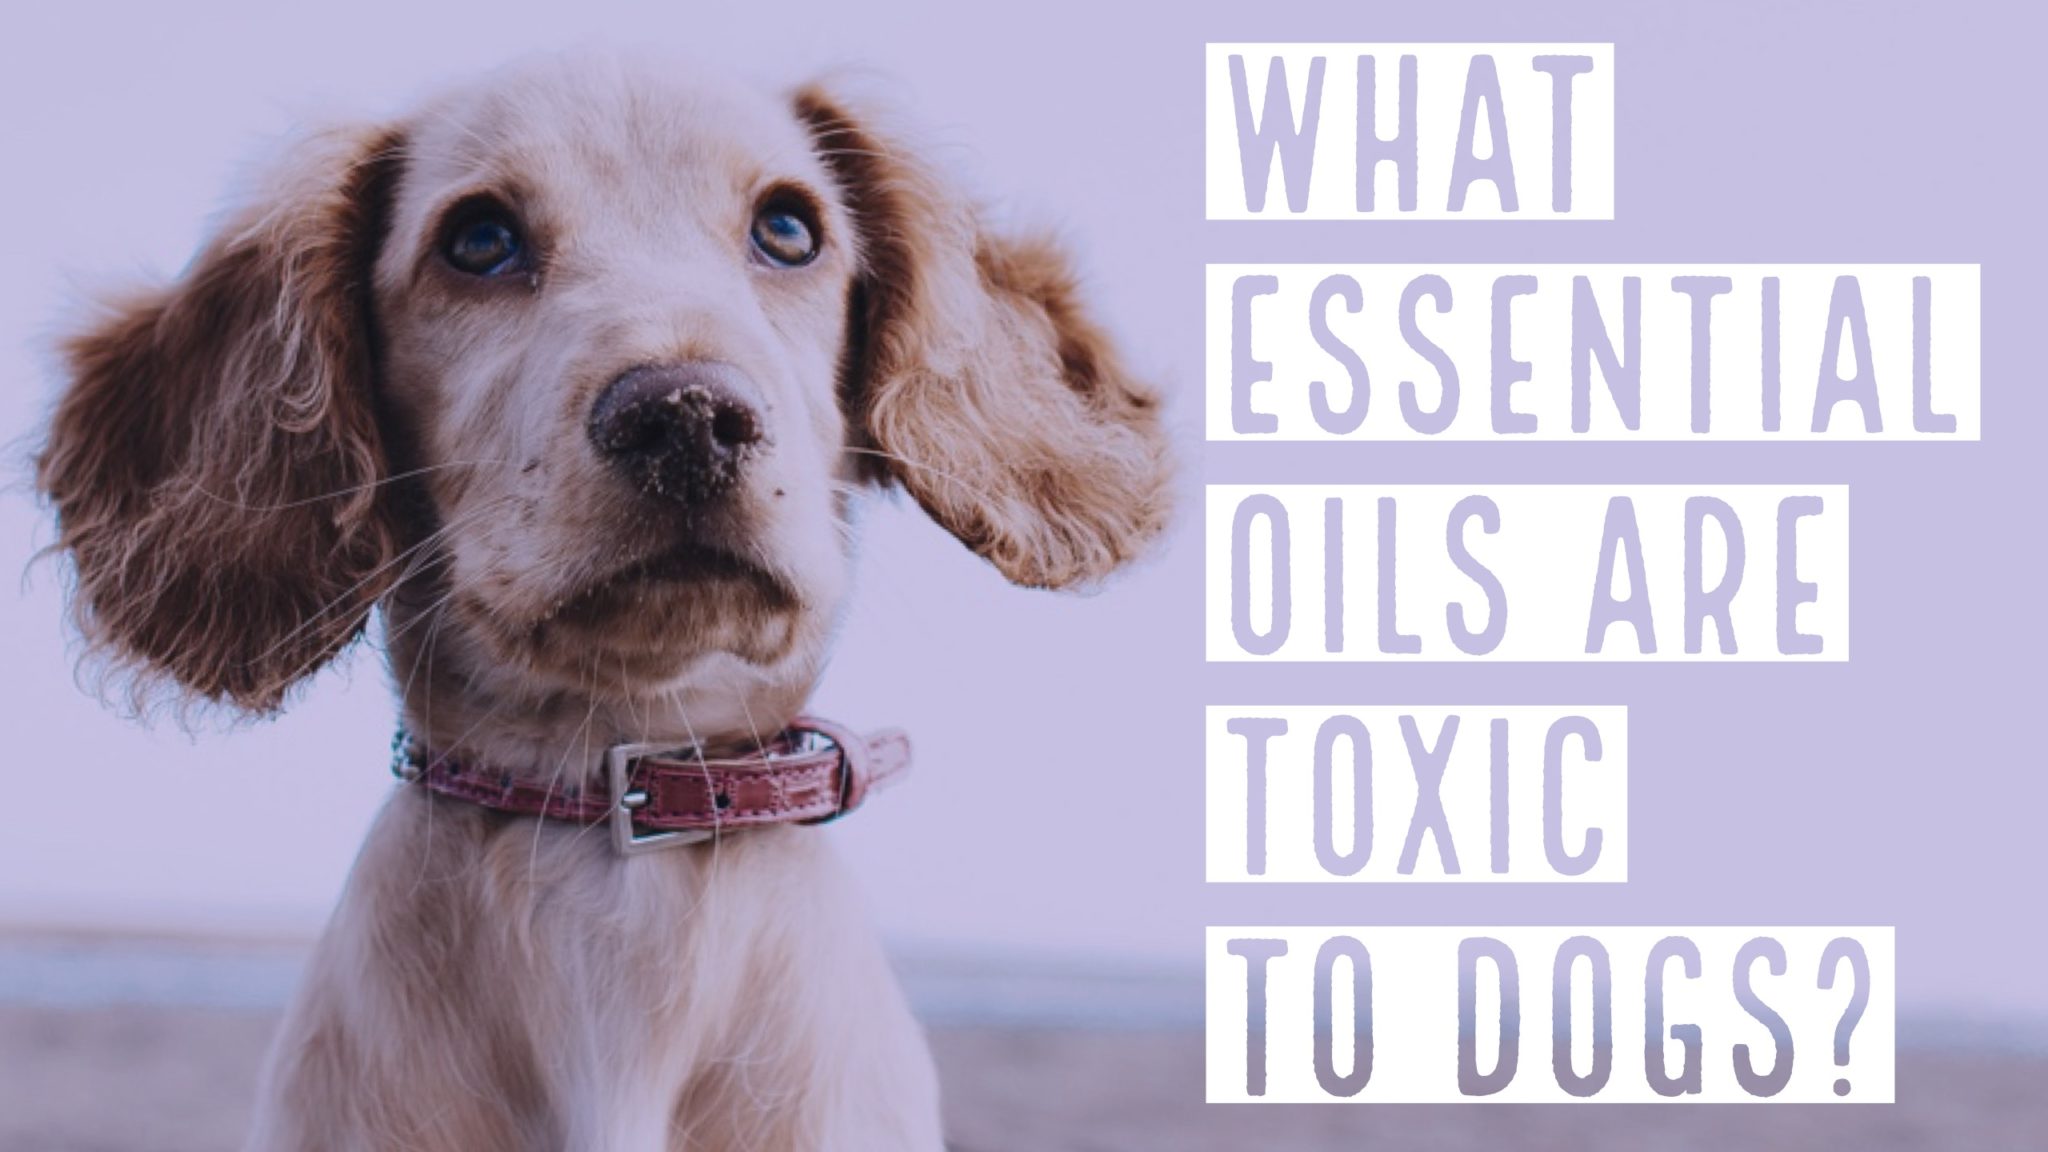 What essential oils are toxic to dogs?